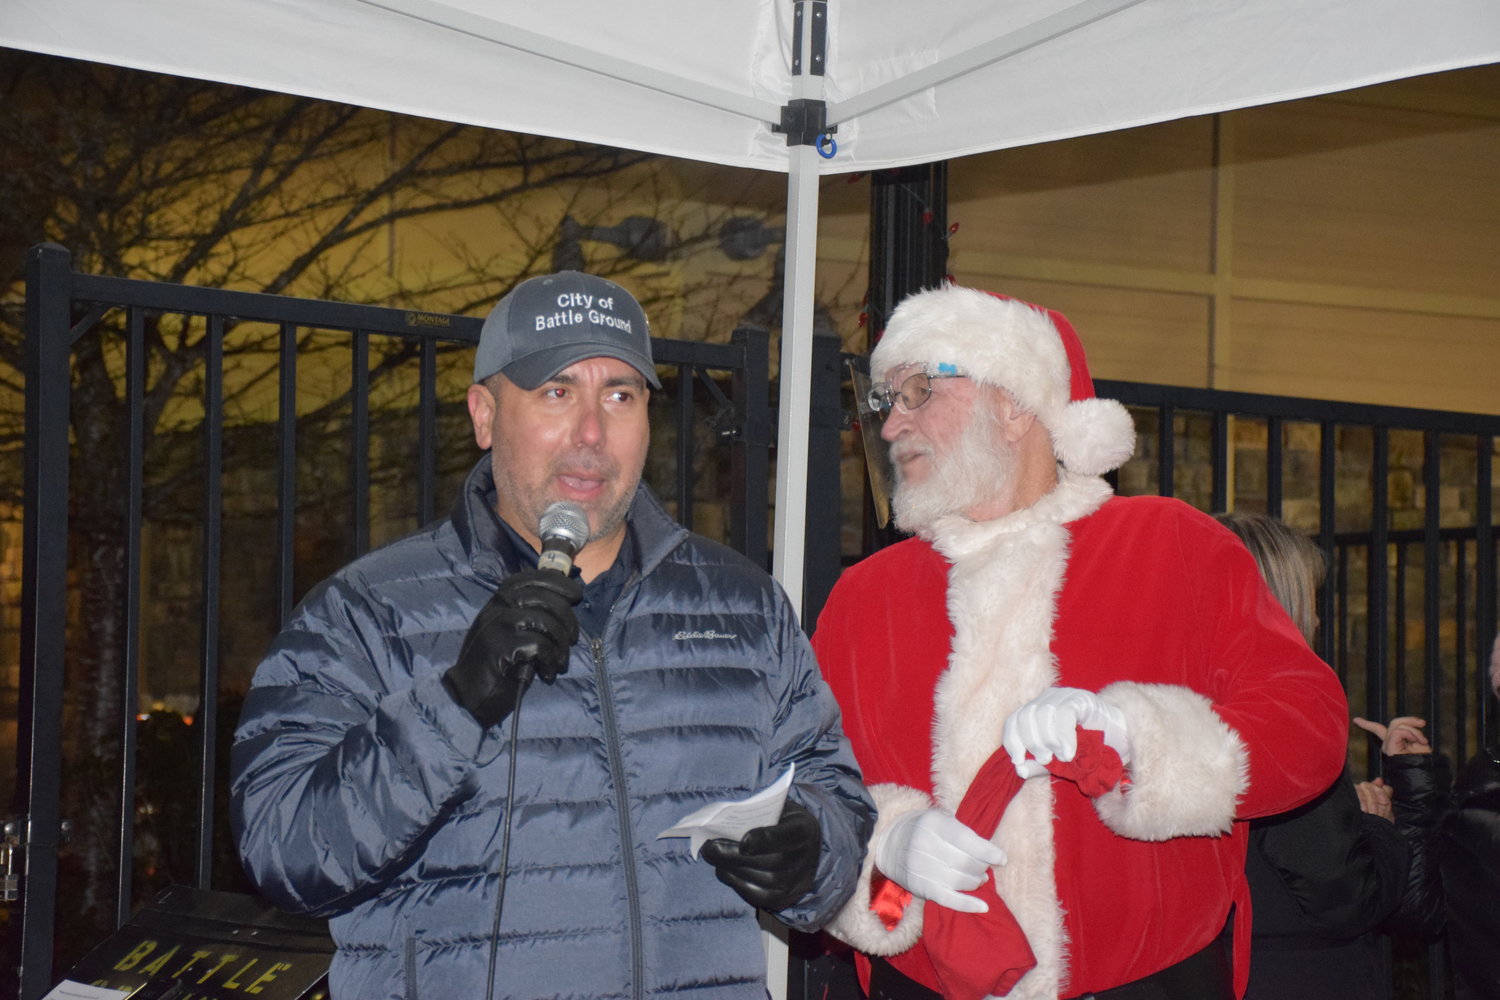 Battle Ground Mayor Adrian Cortes speaks with Santa at his side during the city’s annual tree lighting ceremony on Dec. 3.